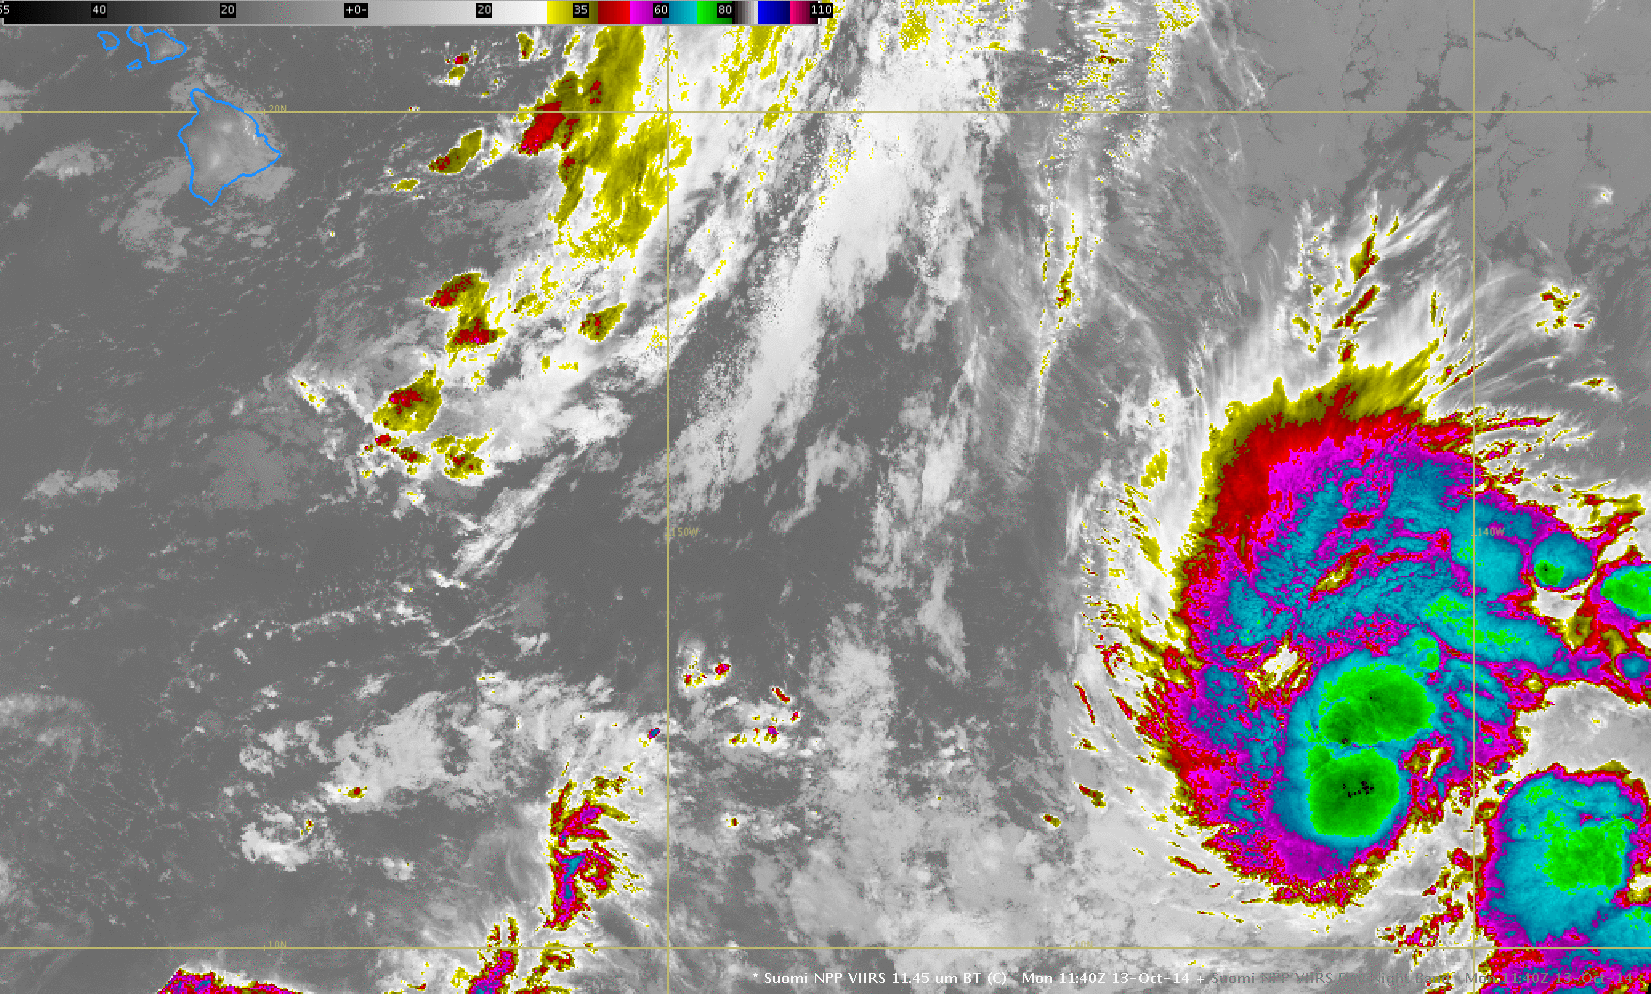 Suomi NPP 11.45 µm Infrared Imagery 13-15 October 2014 (click to enlarge)